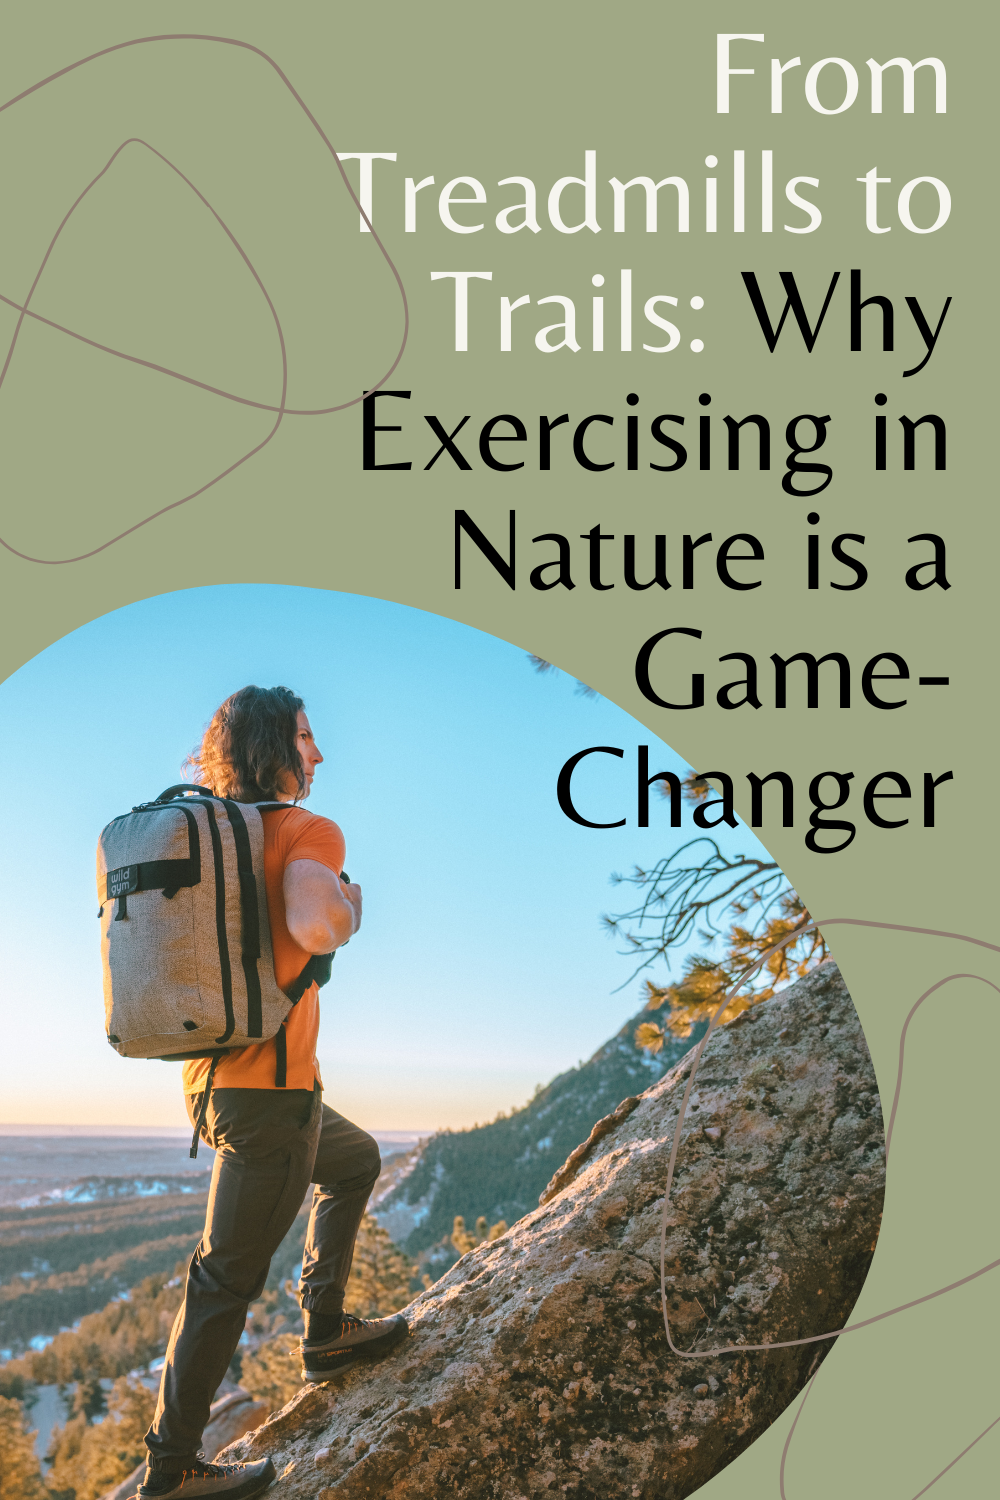 Being outdoors exposes our bodies to microbes which help to “train” our immune systems. But it also increases the activity of our killer T-cells as well as anti-cancer proteins. Studies show that exposure to forests specifically increases these benefits.